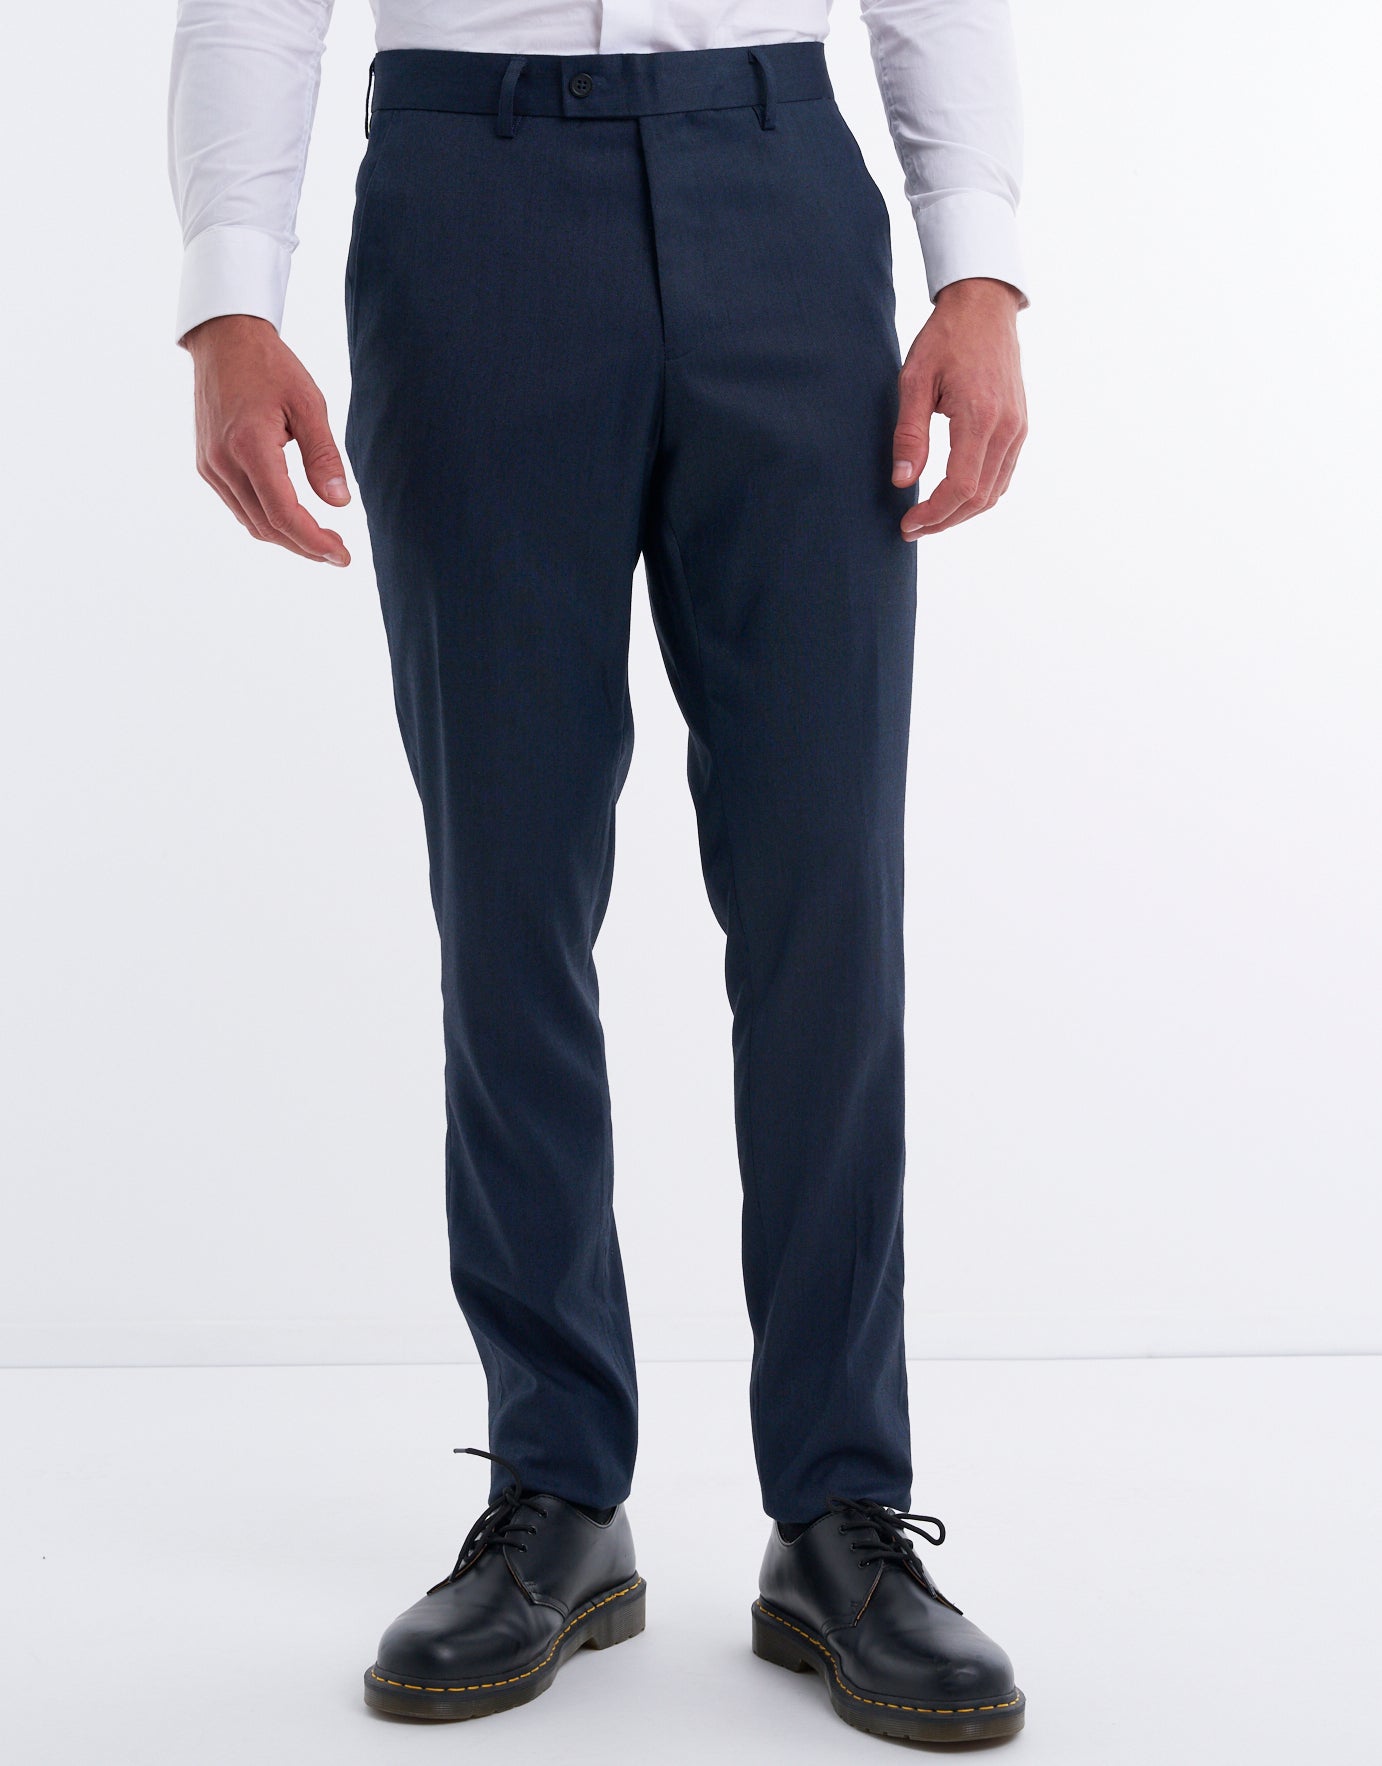 Mens Slim Fit Trousers | Mens Chino & Cord Trousers | Next Official Site